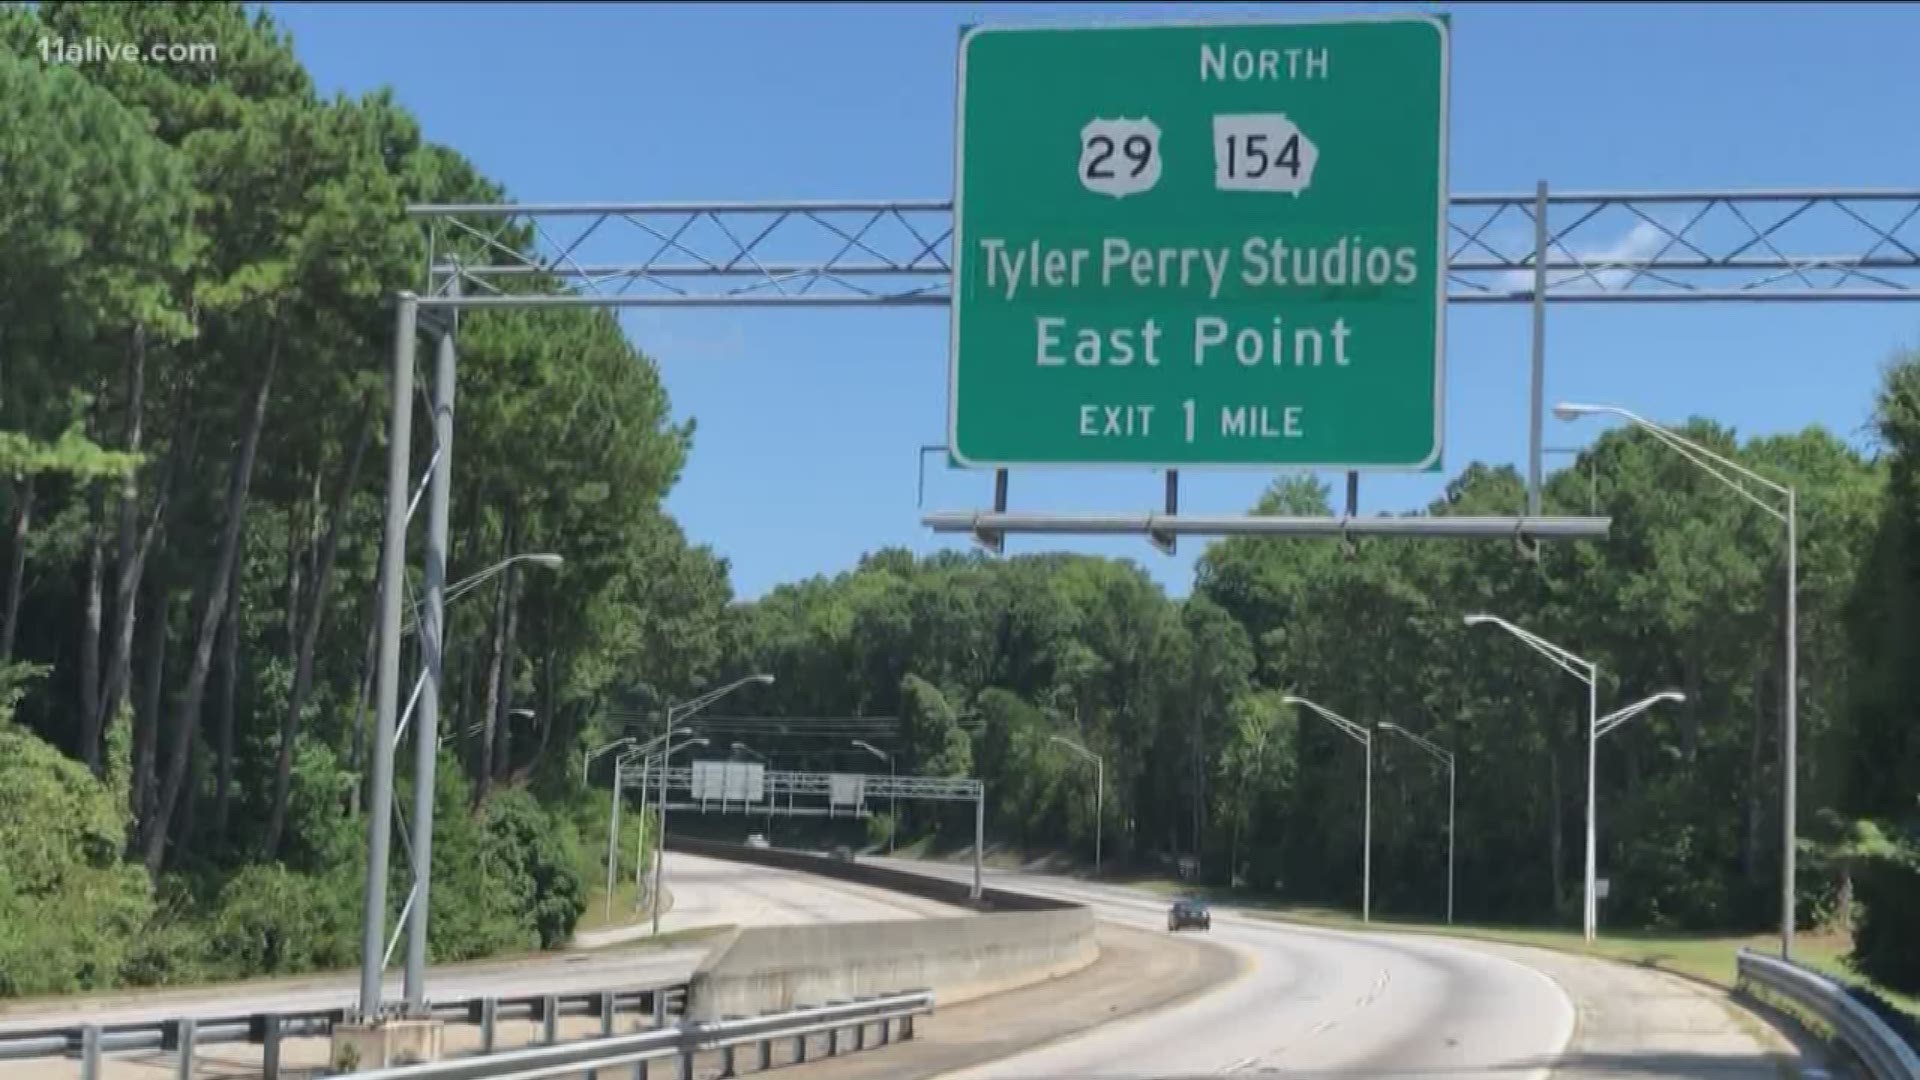 Tyler Perry Studios is already poised to become one of the largest motion picture studios in the U.S.